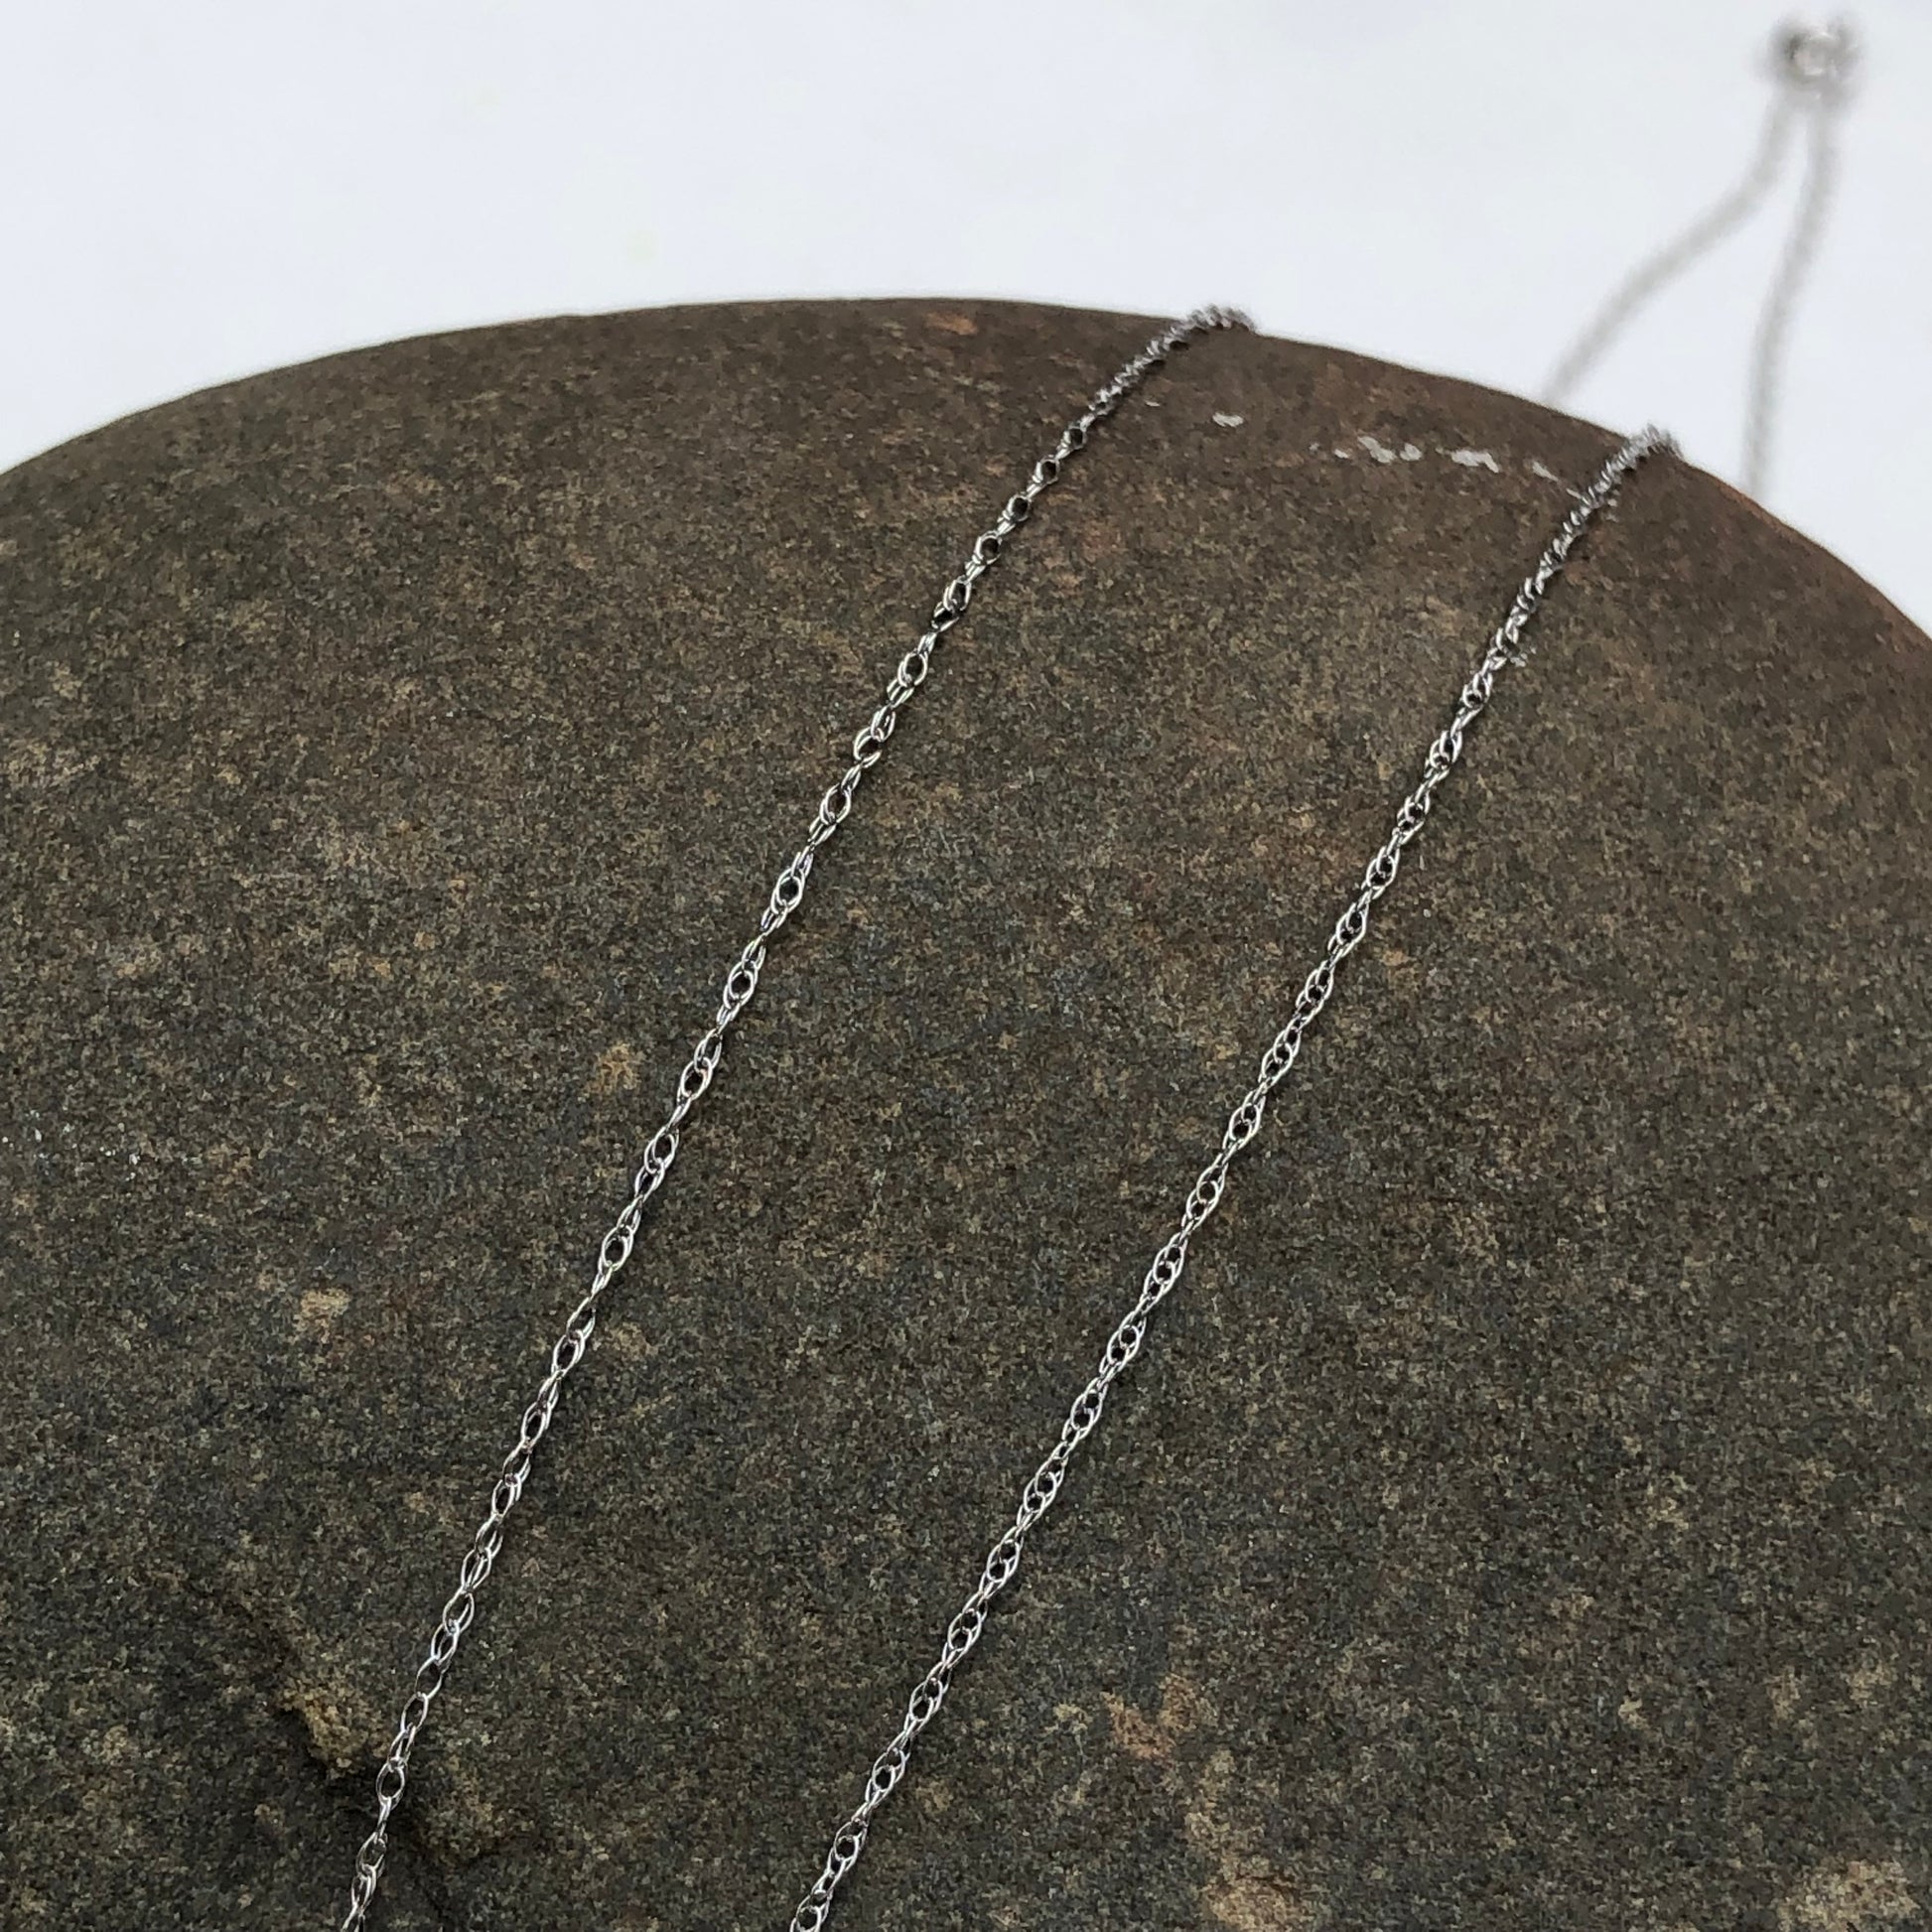 14KT White Gold Cable Rope Chain Necklace .5mm, 14KT White Gold Cable Rope Chain Necklace .5mm - Legacy Saint Jewelry